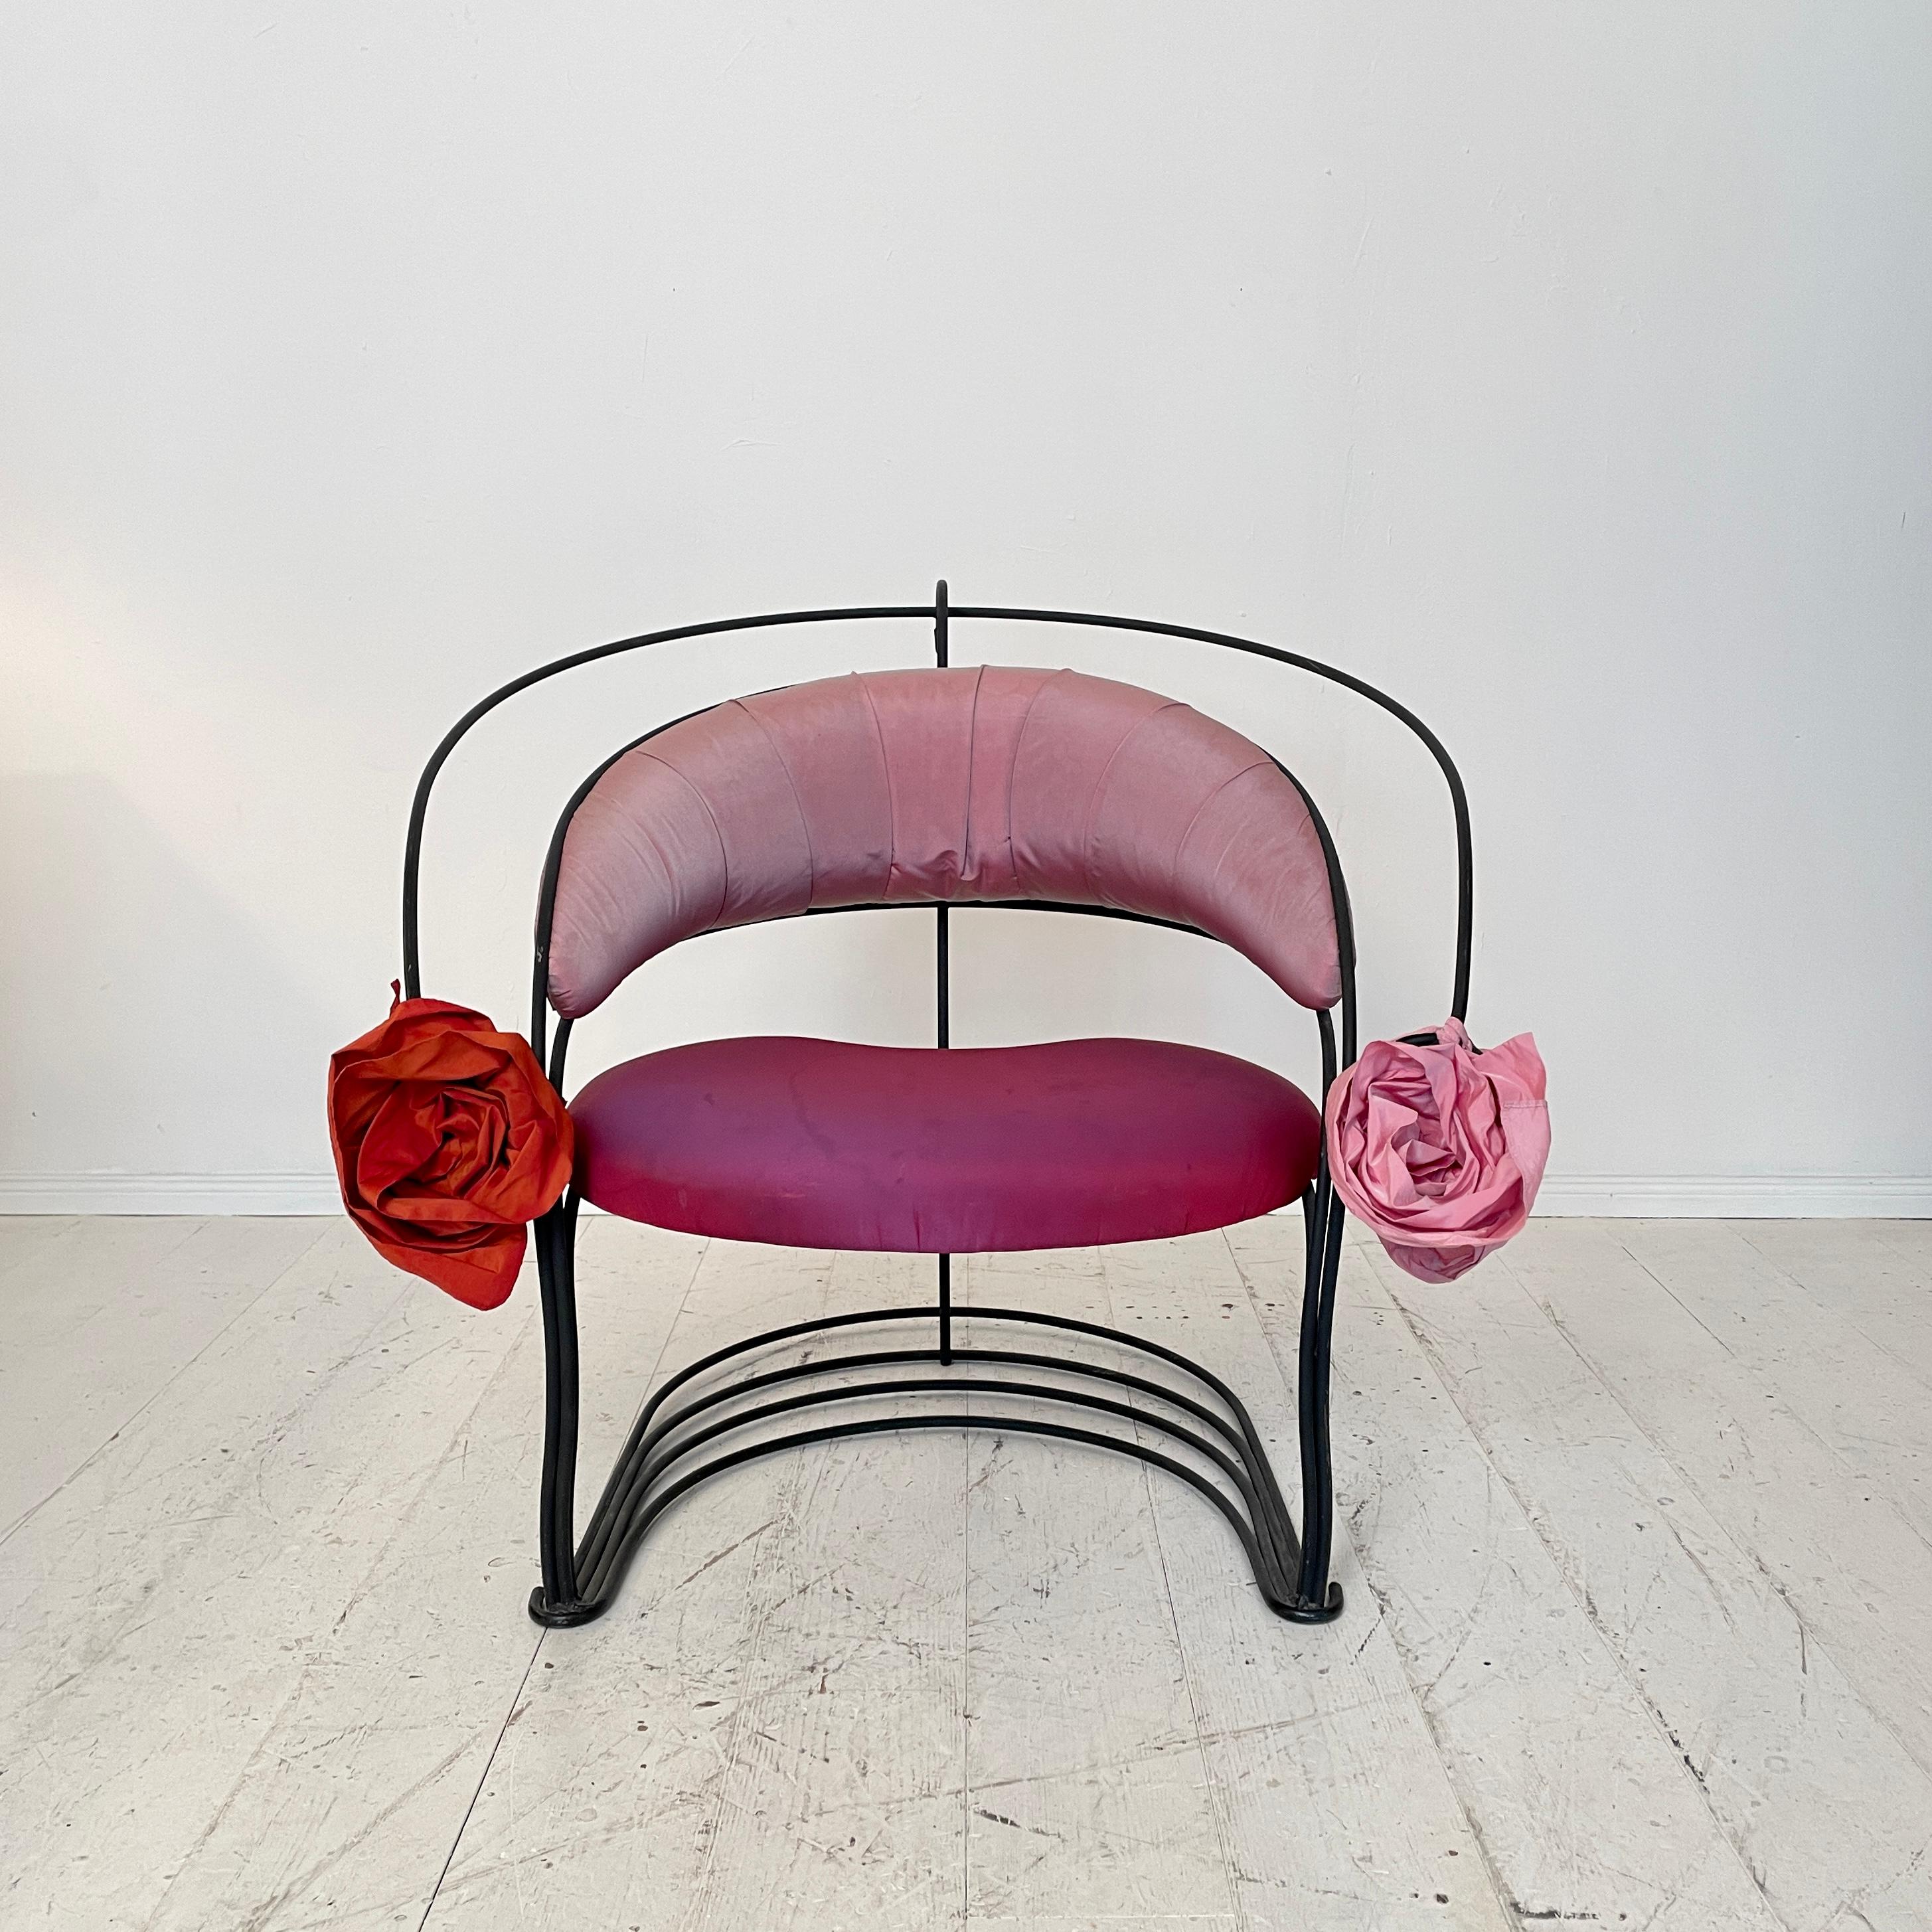 This fantastic Italian Post-Modern sculptural Armchair was made in the 1980s.
It is made out of black lacquered metal and has got a pink and red Silk Upholstery.
At the End of the Armrest is has got big flowers made out of Silk.
A very rare and